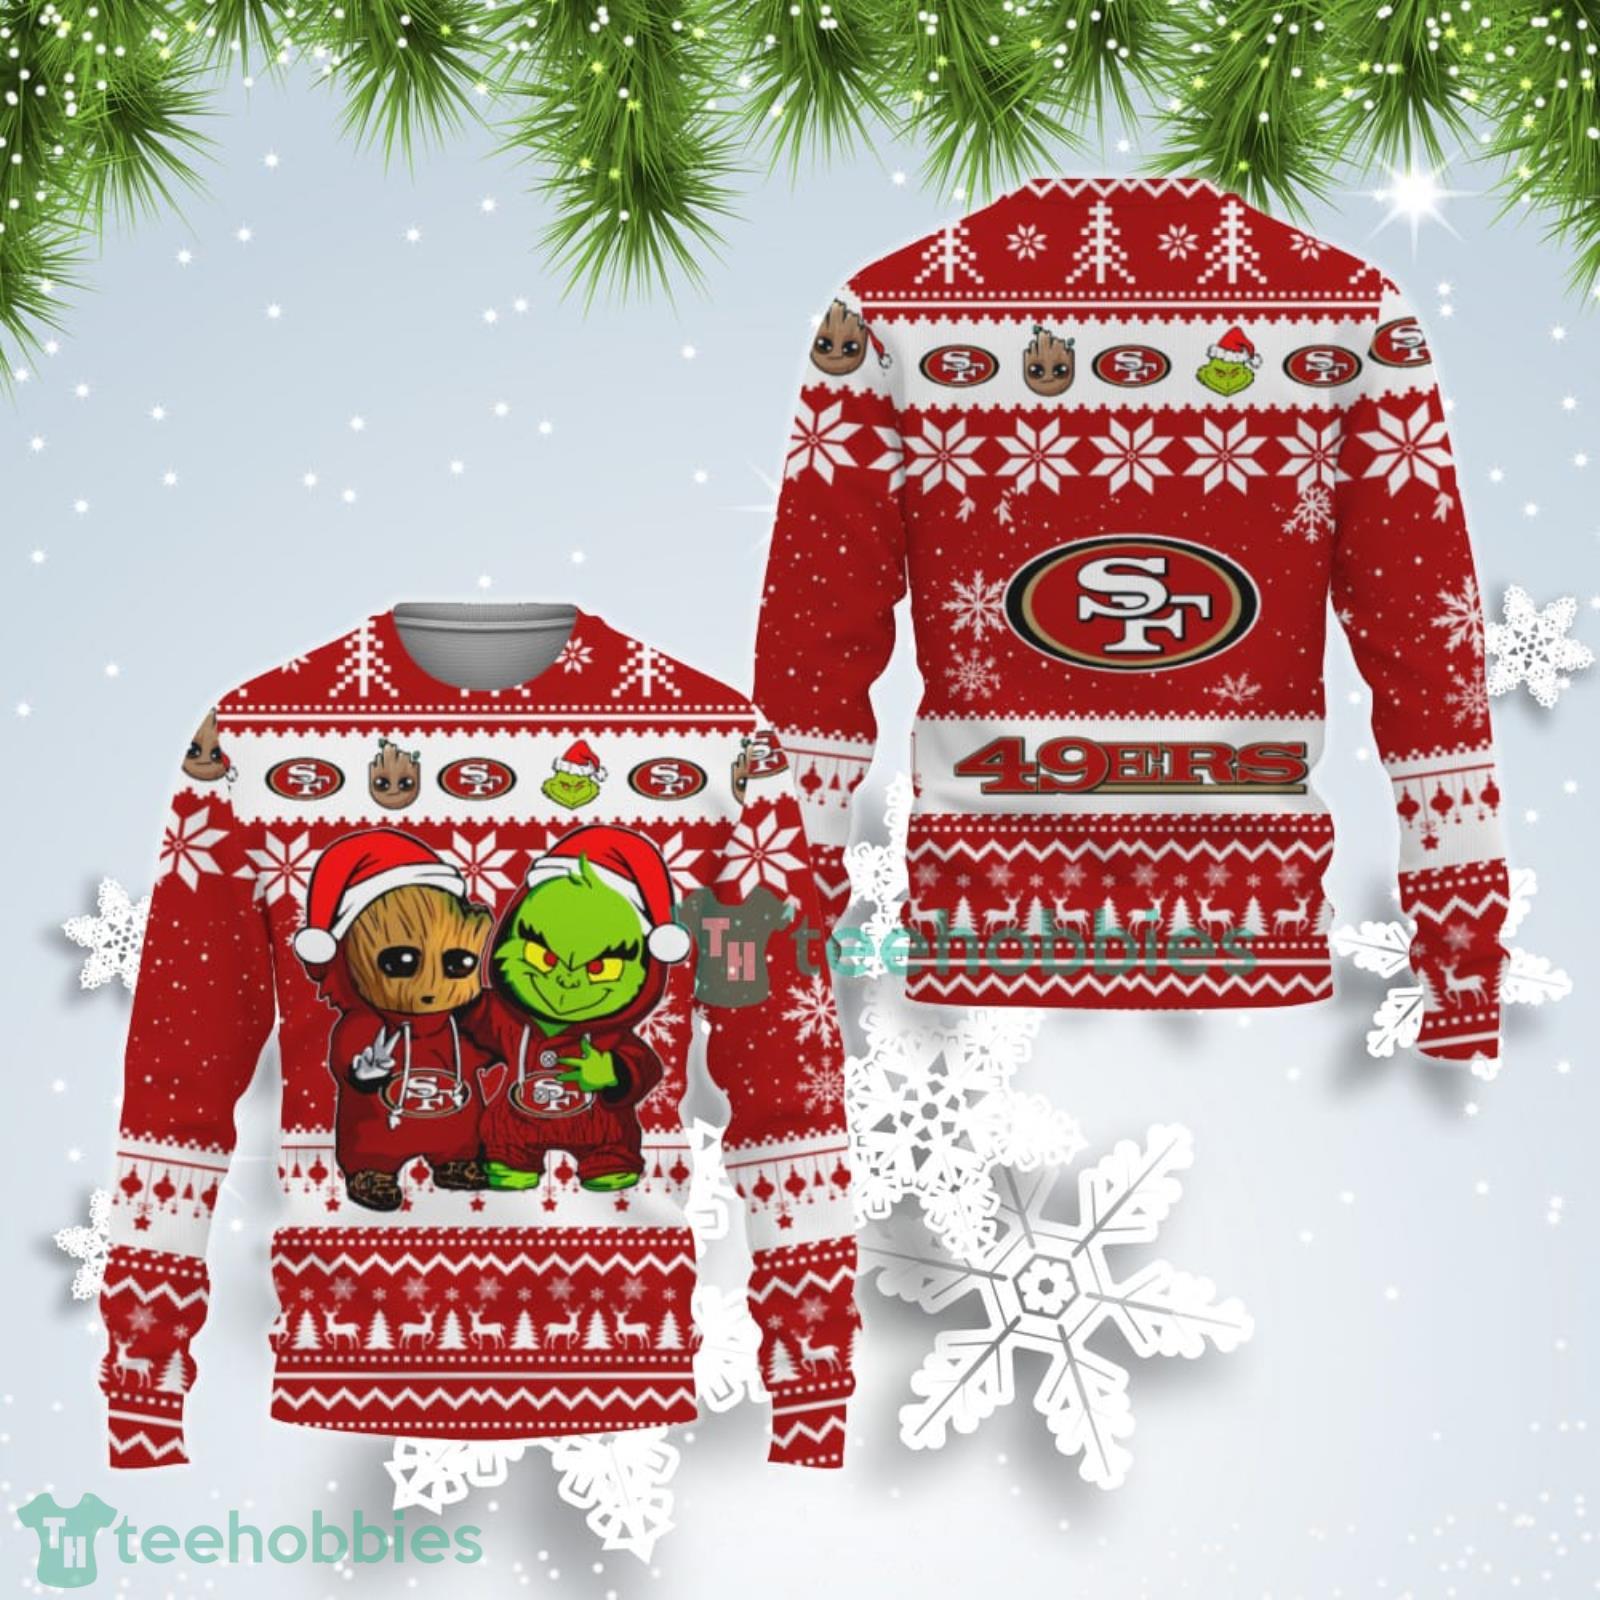 49ers red sweater